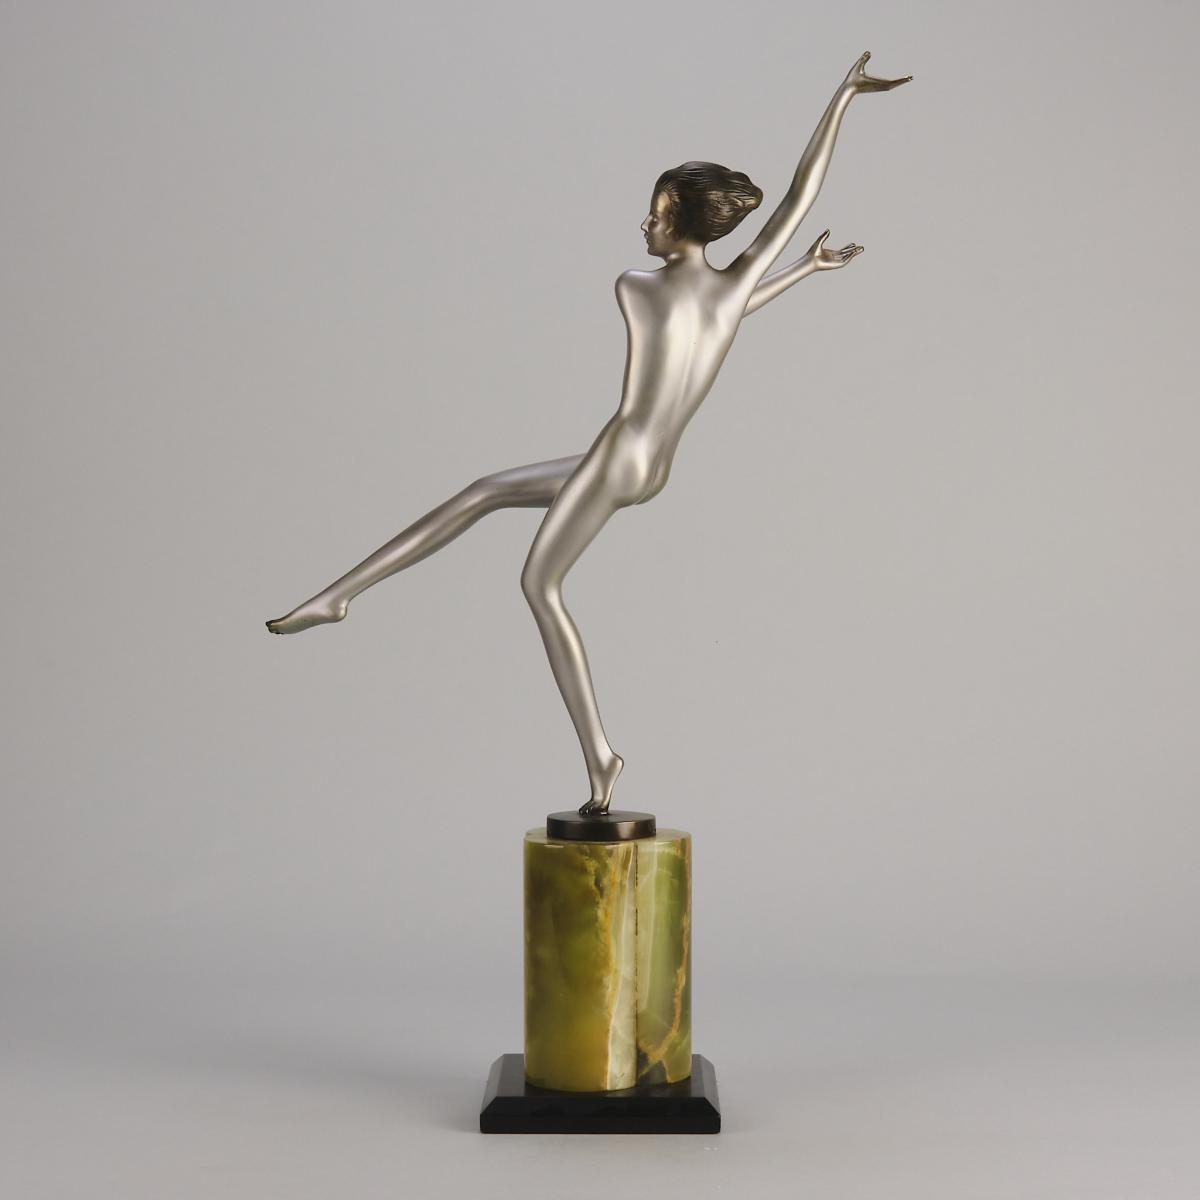 20th Century Cold-Painted Austrian Bronze Entitled "Leg Out" by Josef Lorenzl